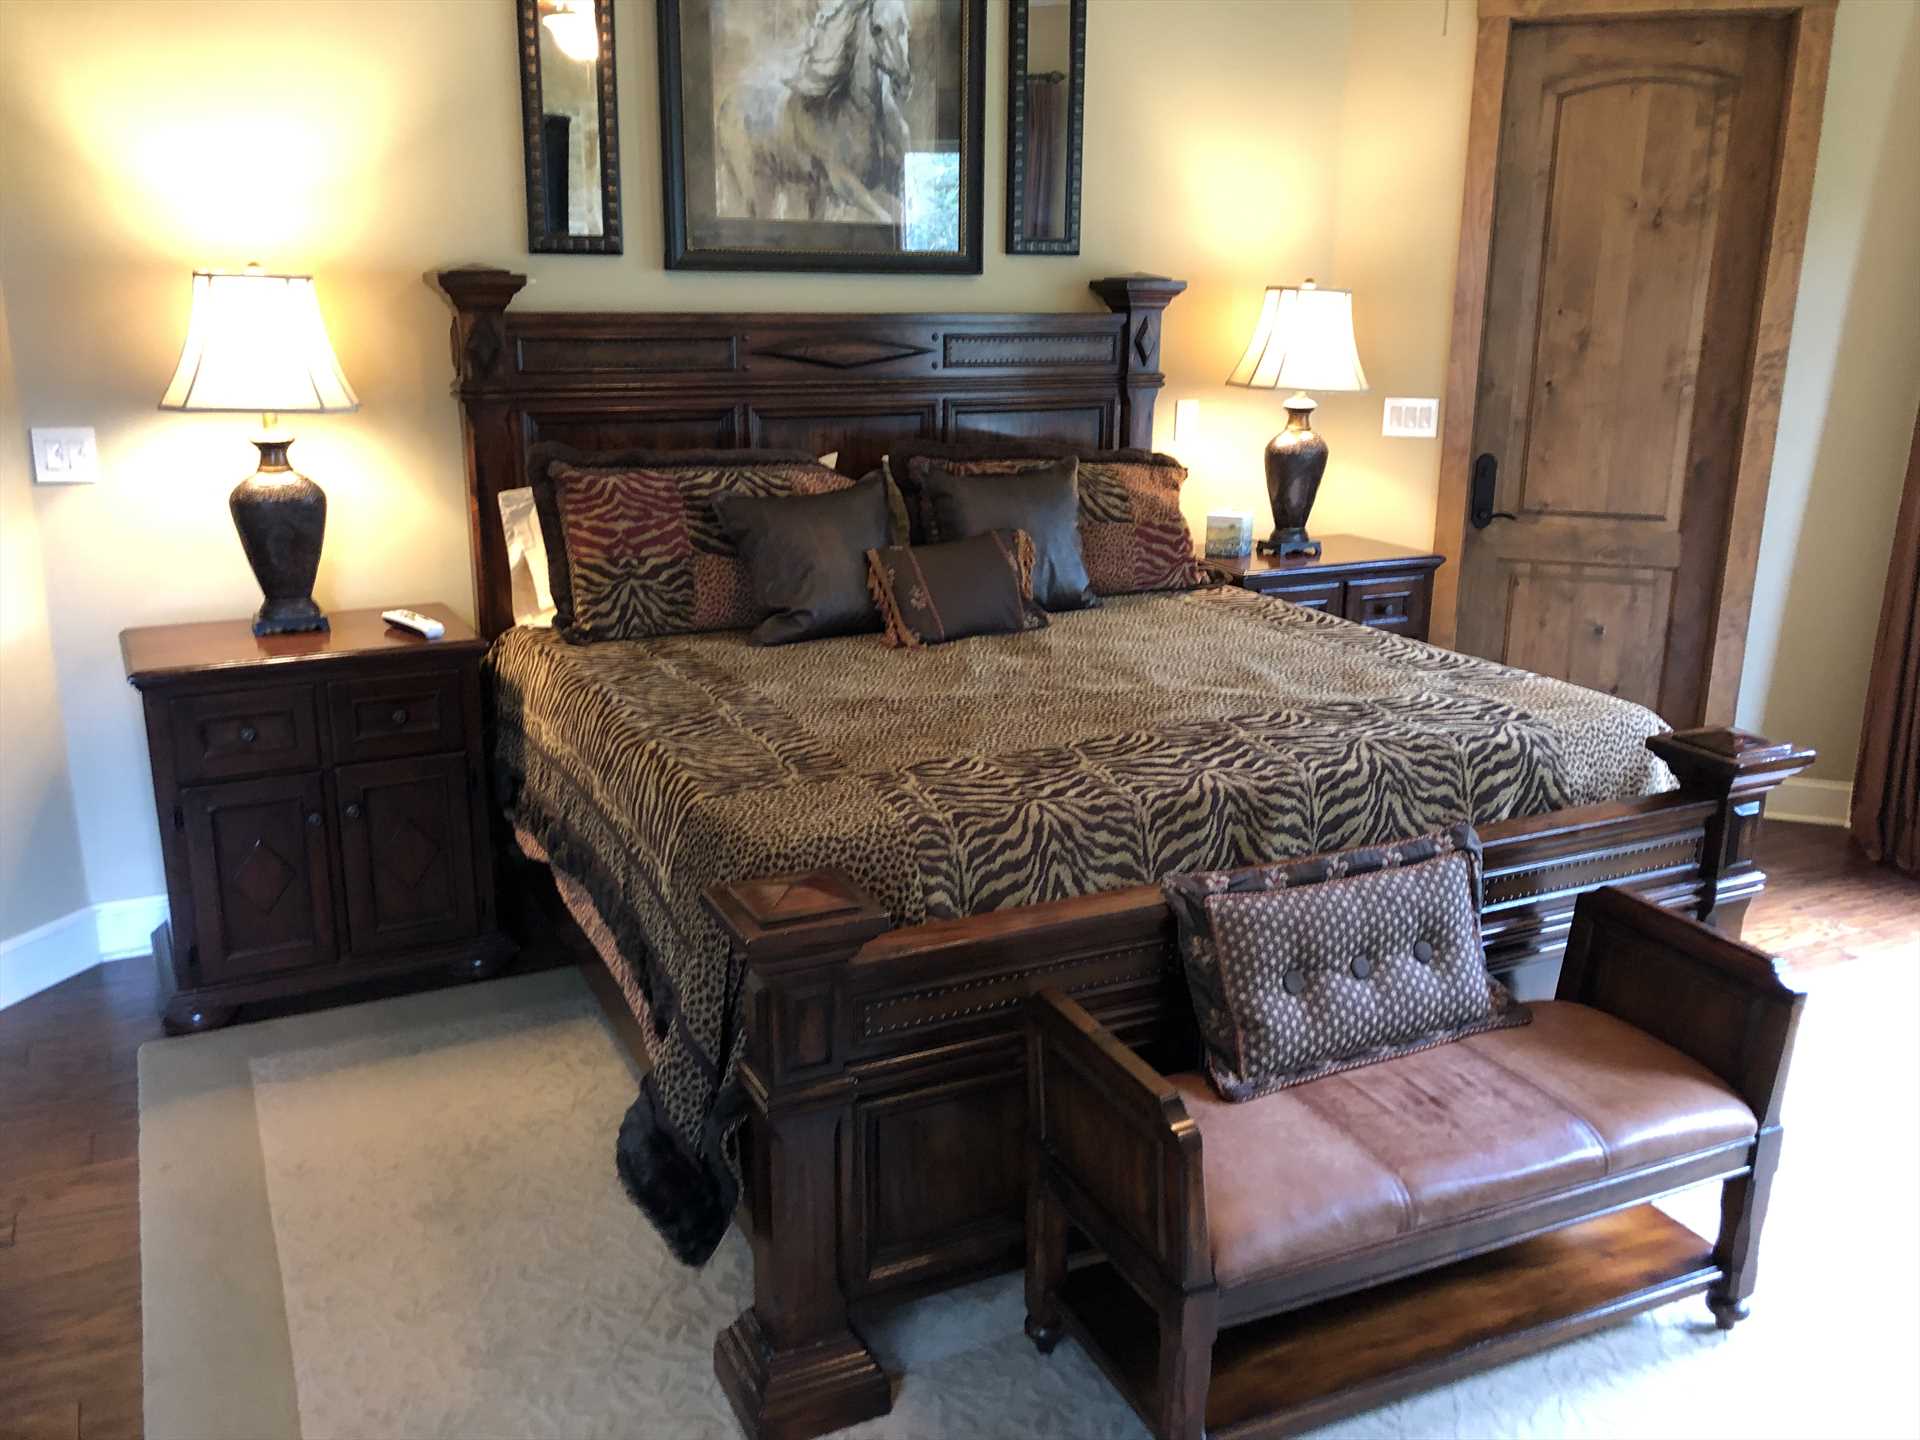                                                 Four bedrooms, each with plush and enormous beds, set the stage for blissful sleep for up to eight guests during your Hill Country getaway!